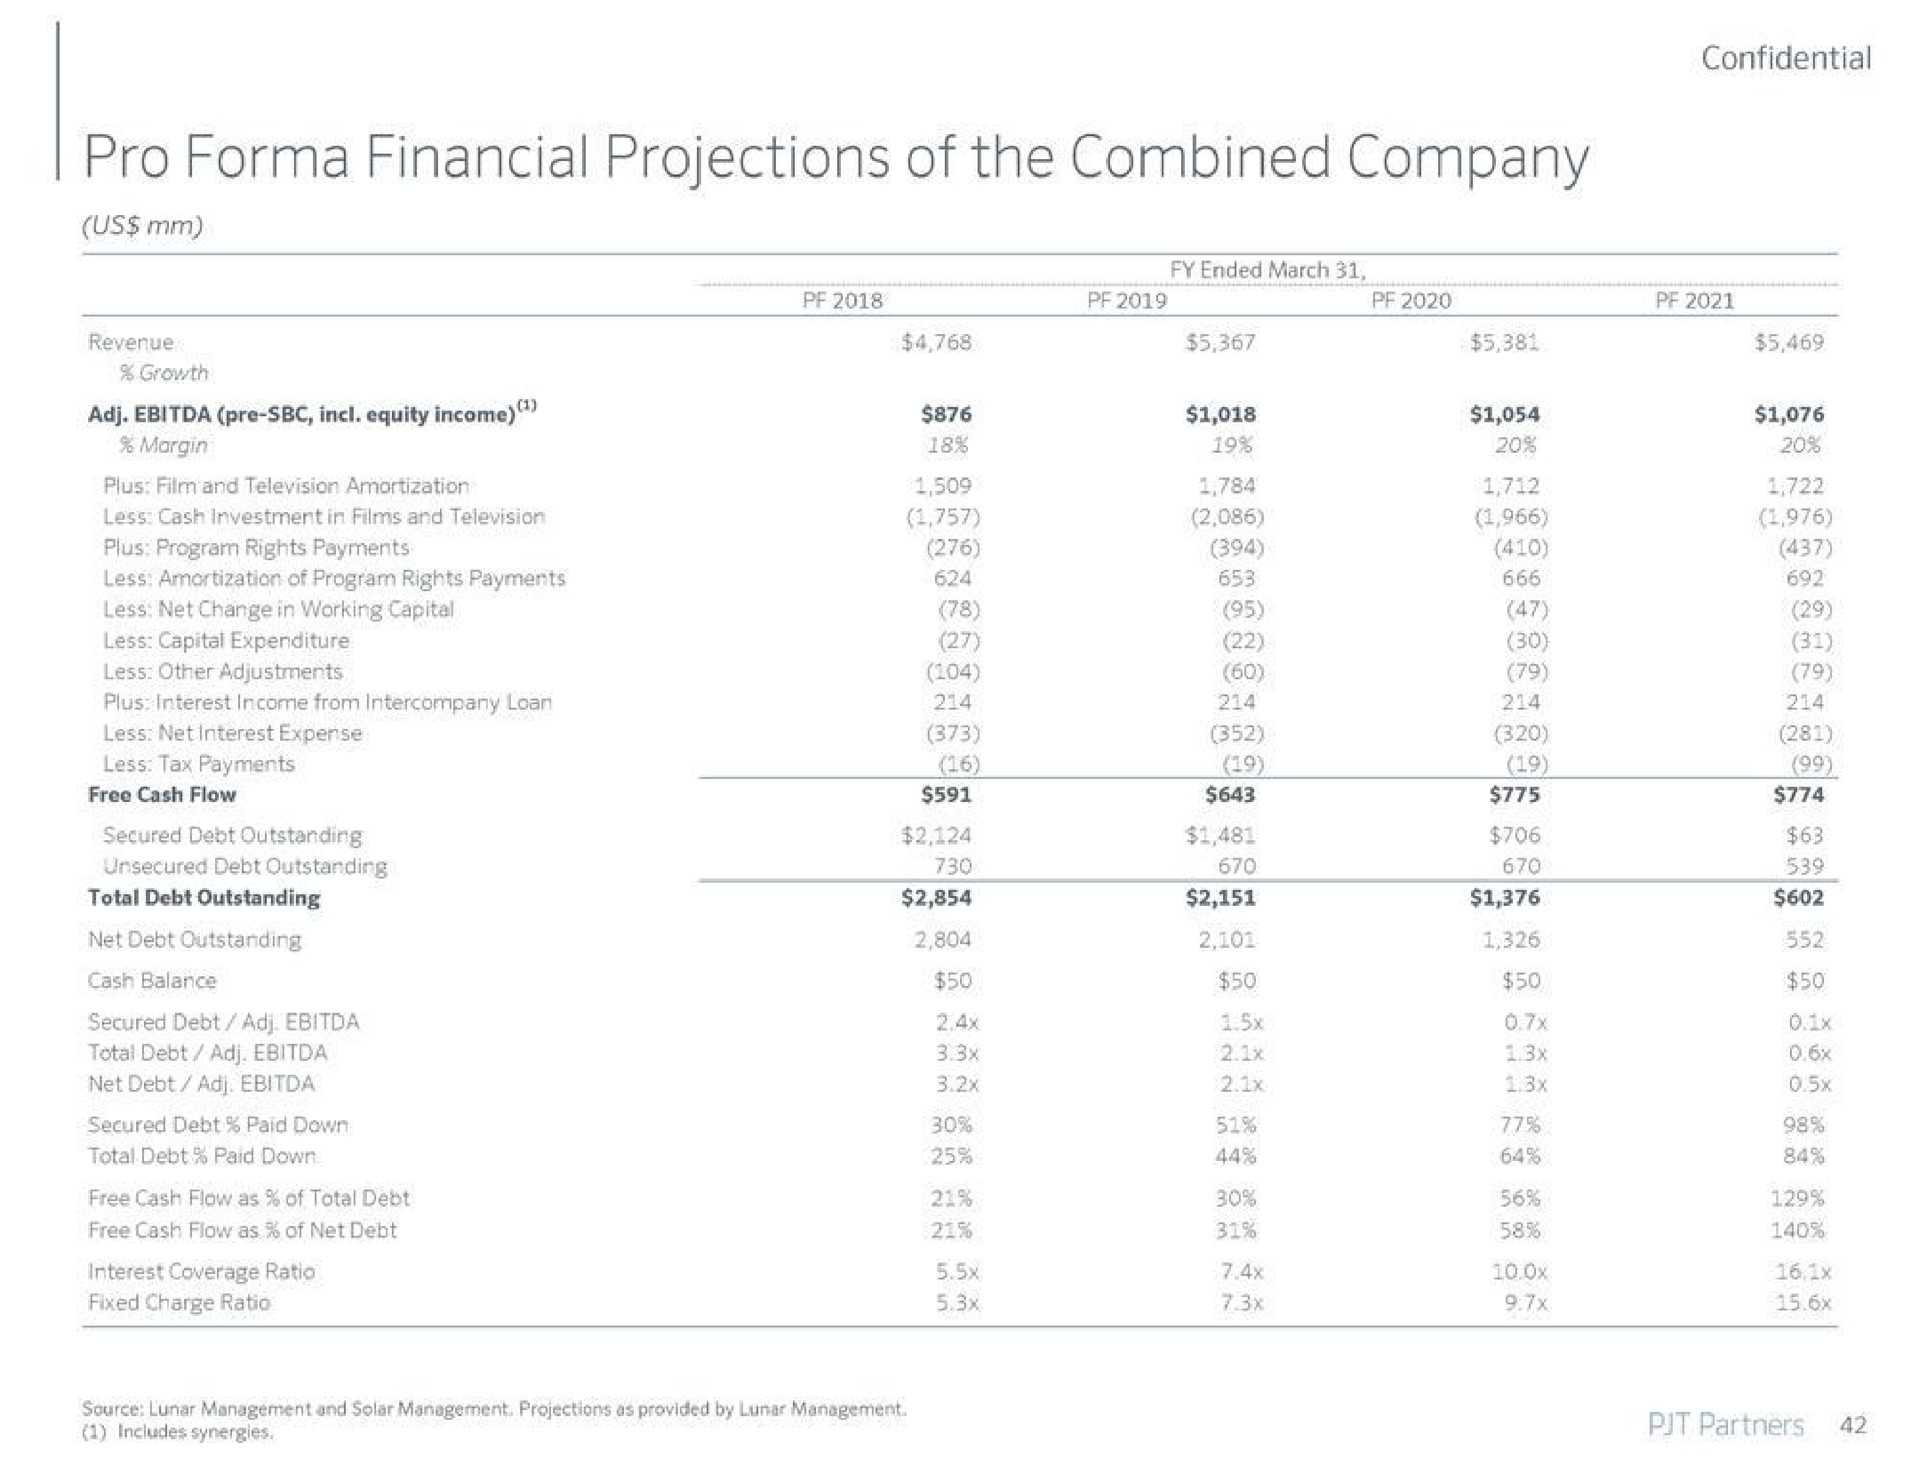 pro financial projections of the combined company | PJT Partners